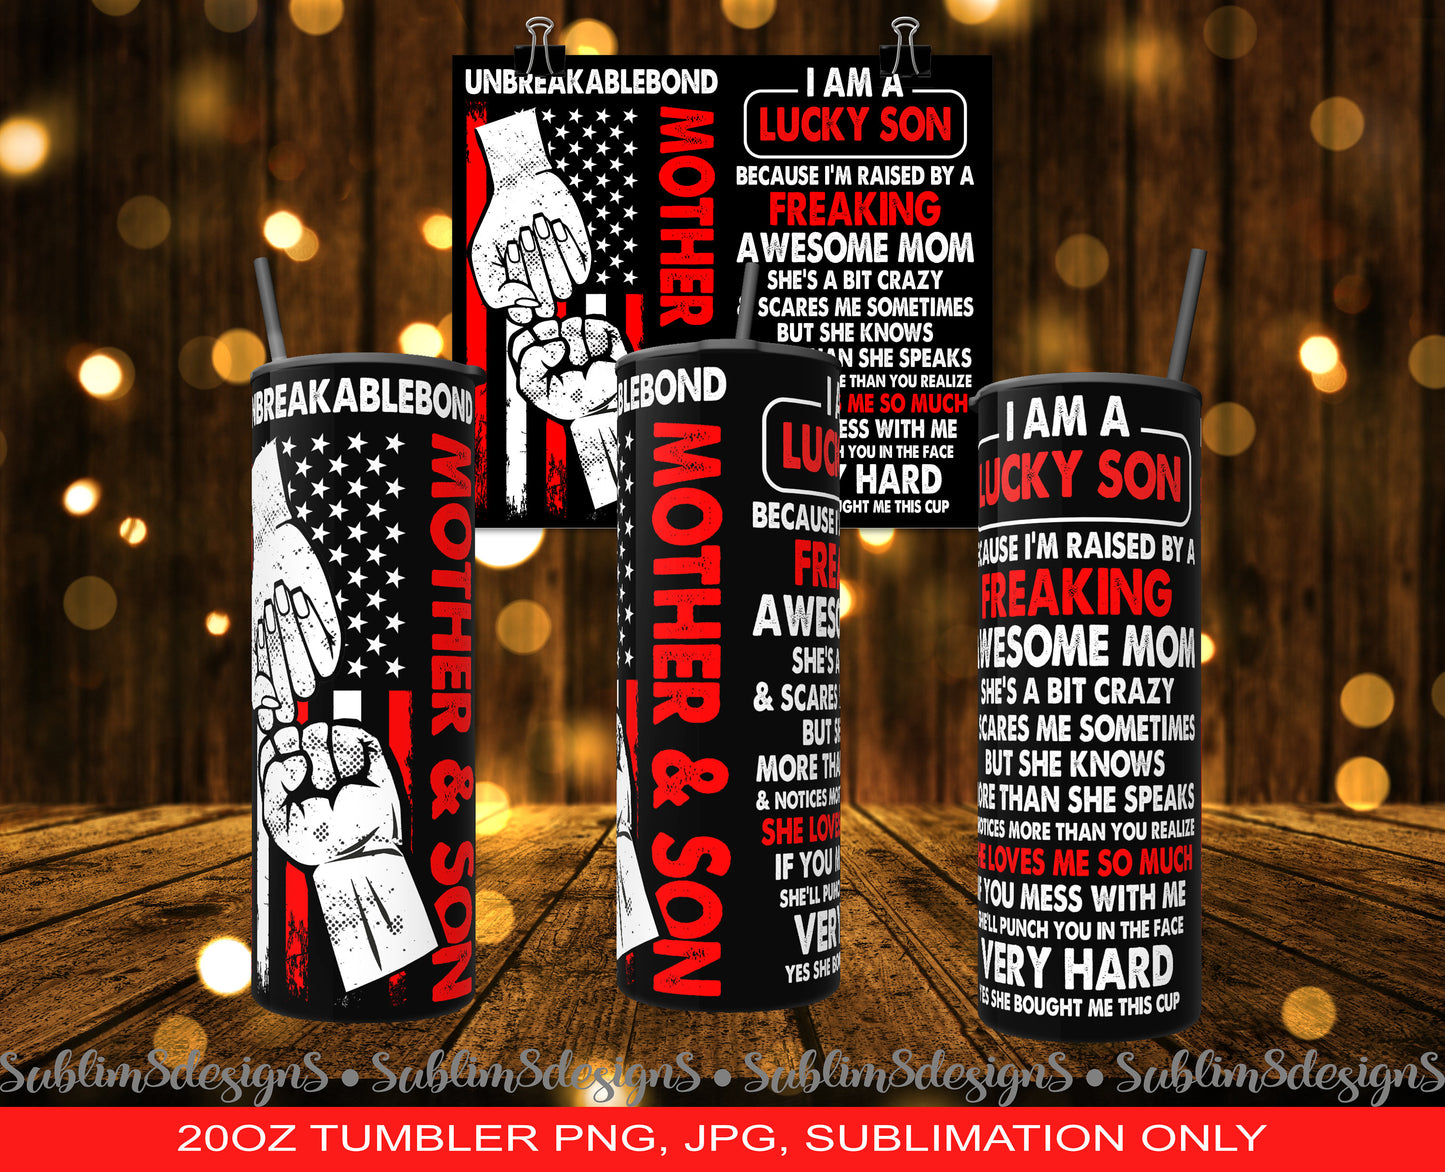 I Am A Lucky Son - Mother's Day Gift - Perfect for the ultimate momma's boy! - Red 20oz Tumbler Design PNG and JPG ONLY